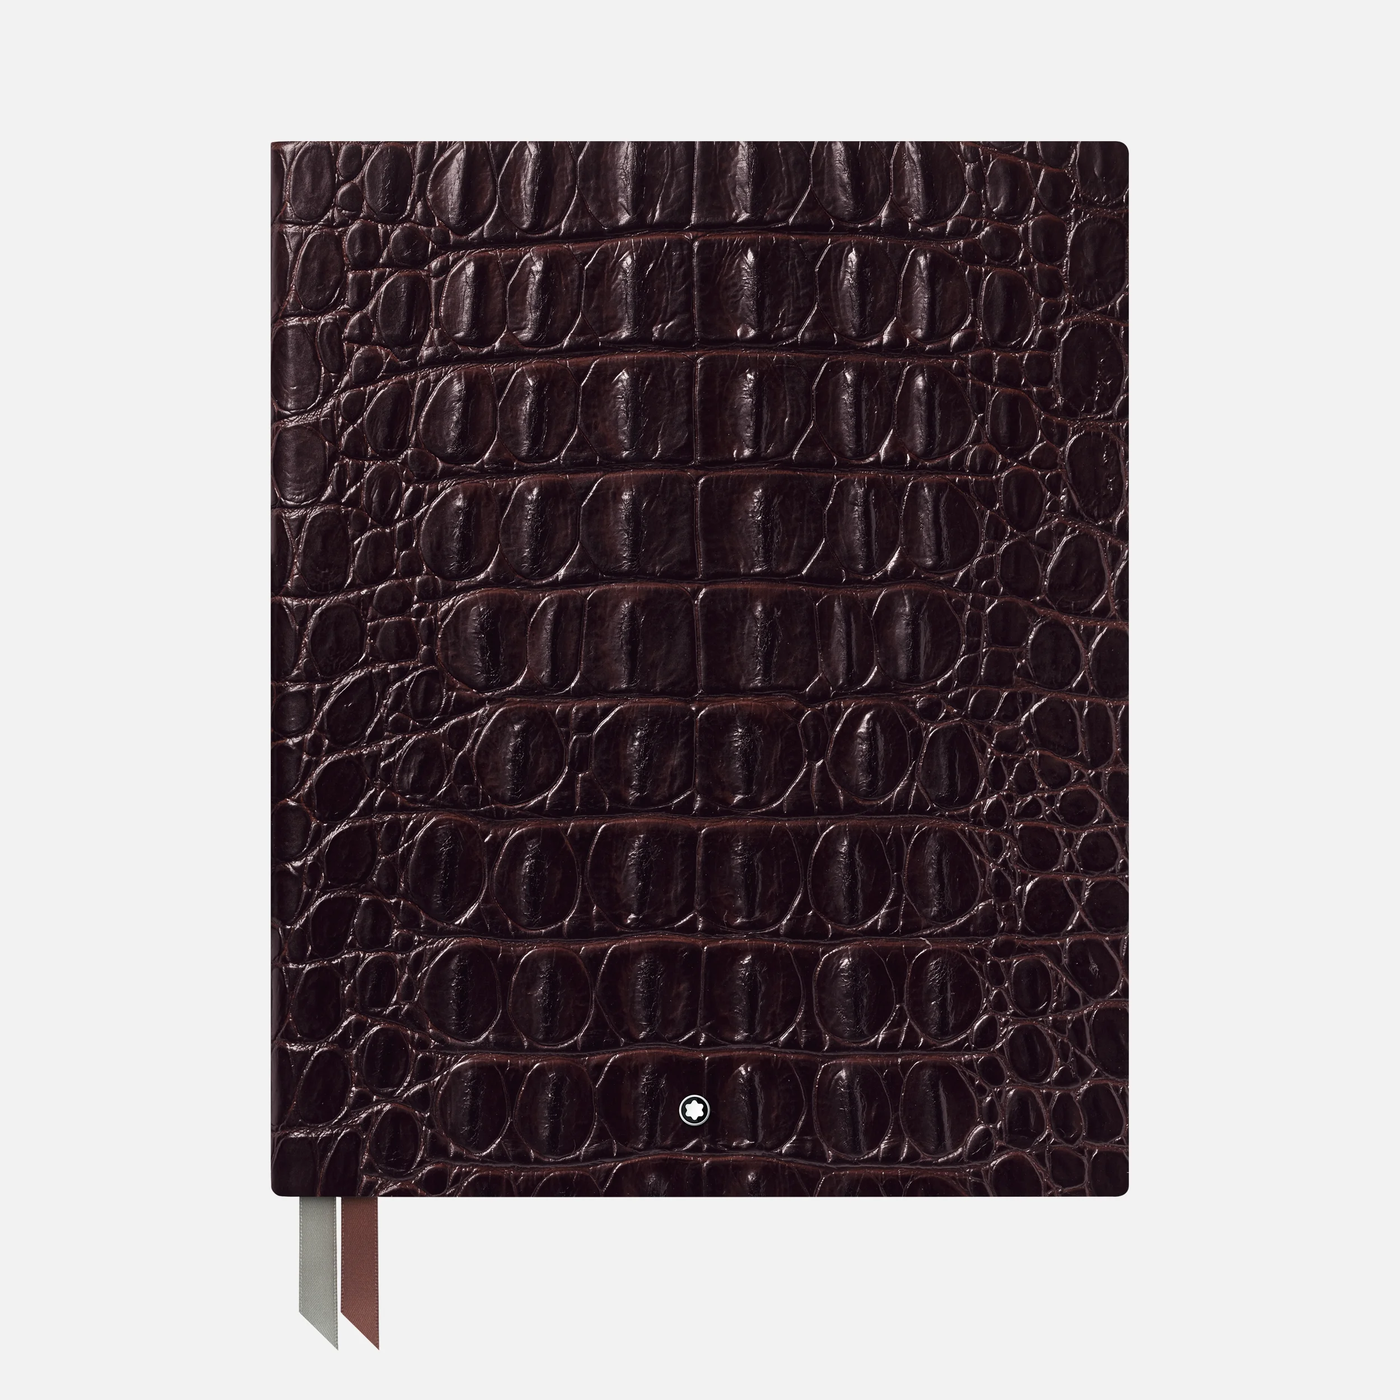 Montblanc Fine Stationery Notebook #149 Croco Print Matte Brown Lined Notebook